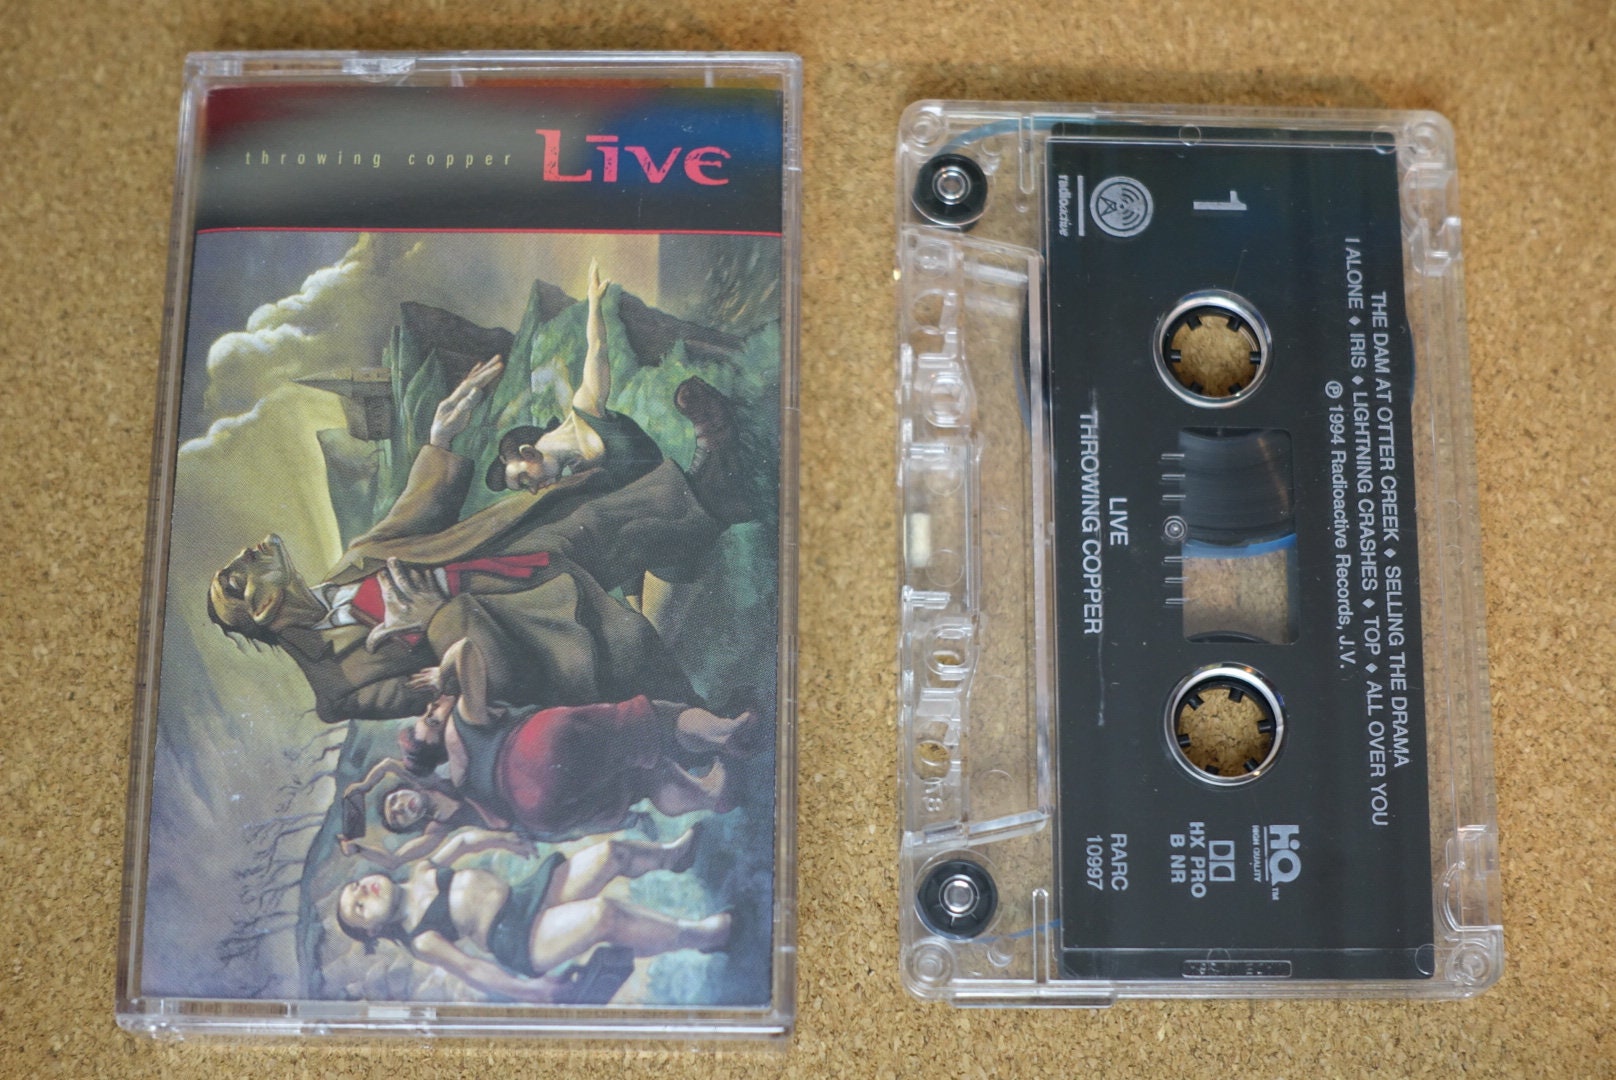 Live - Throwing Copper Cassette Tape - 1994 Radioactive Records Vintage  Analog Music